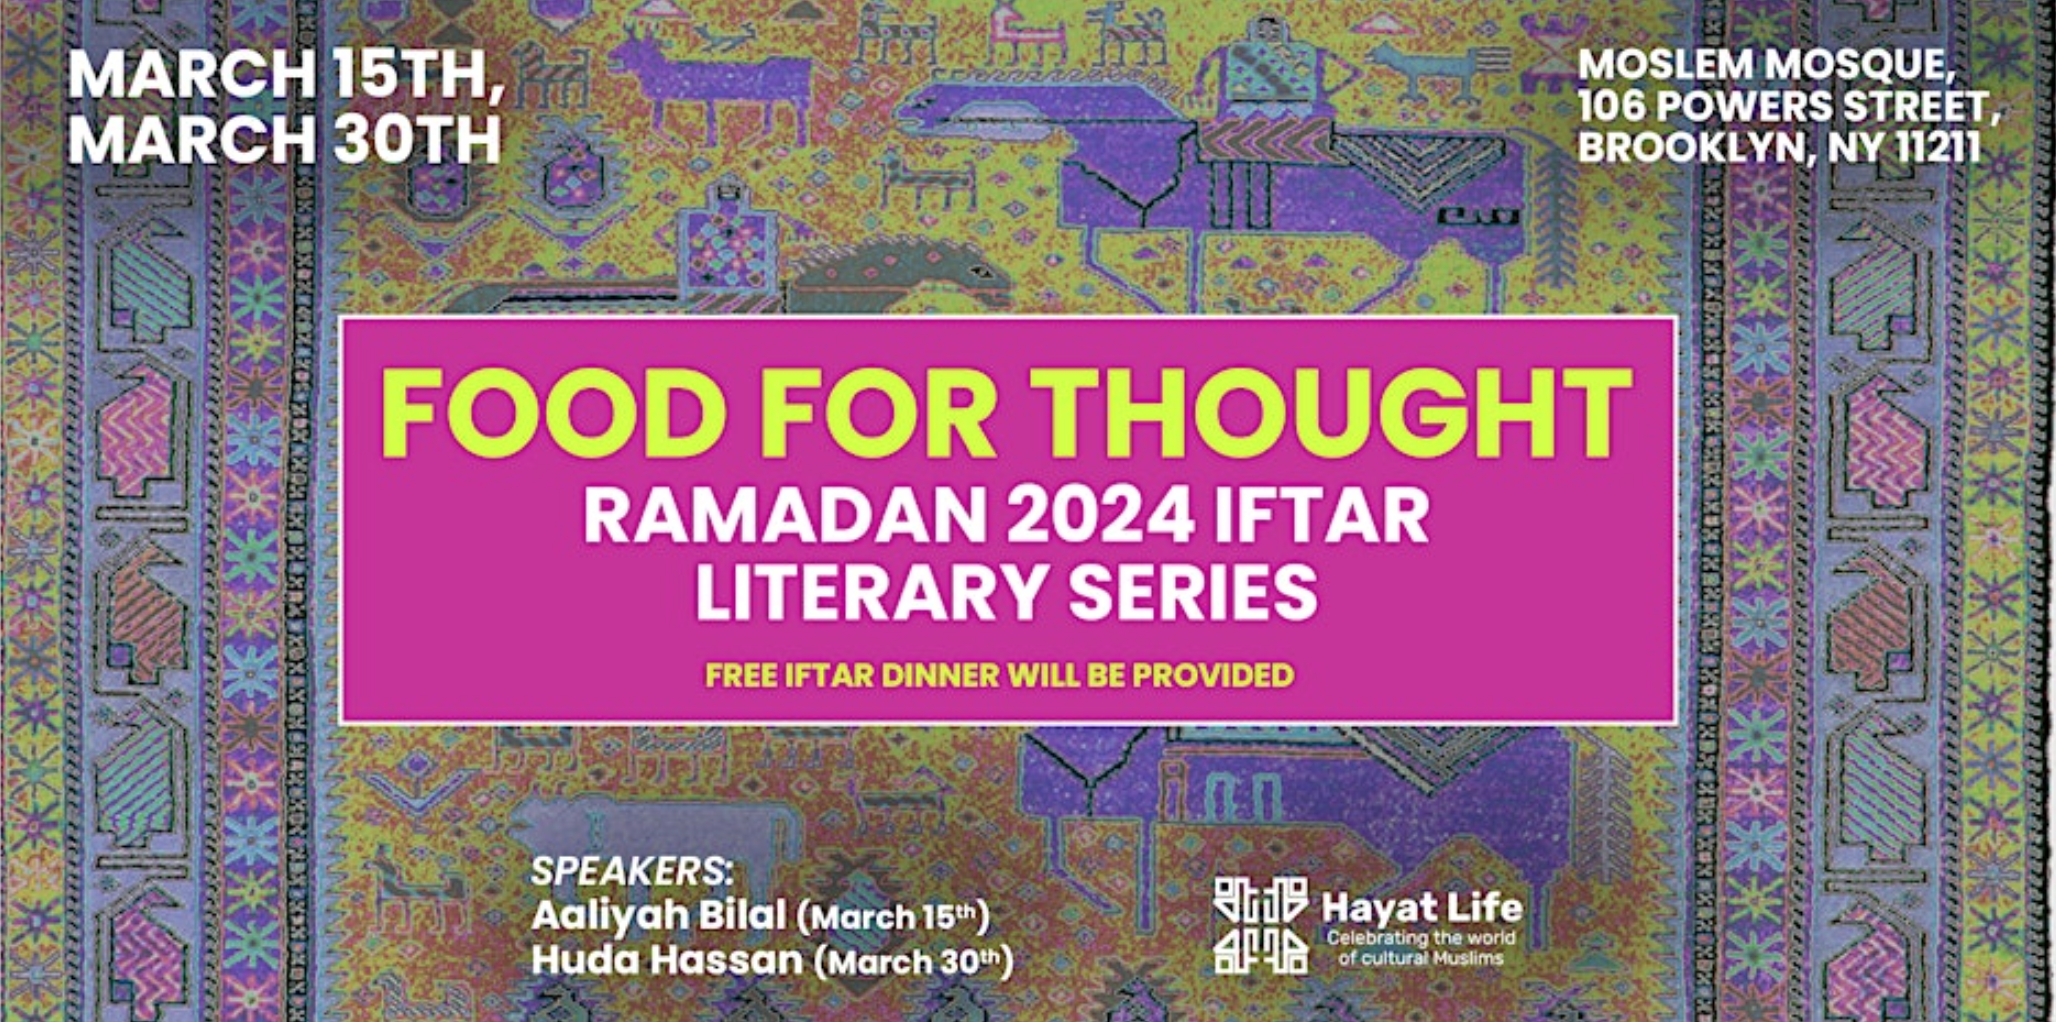 “FOOD FOR THOUGHT” RAMADAN 2024 IFTAR LITERARY SERIES